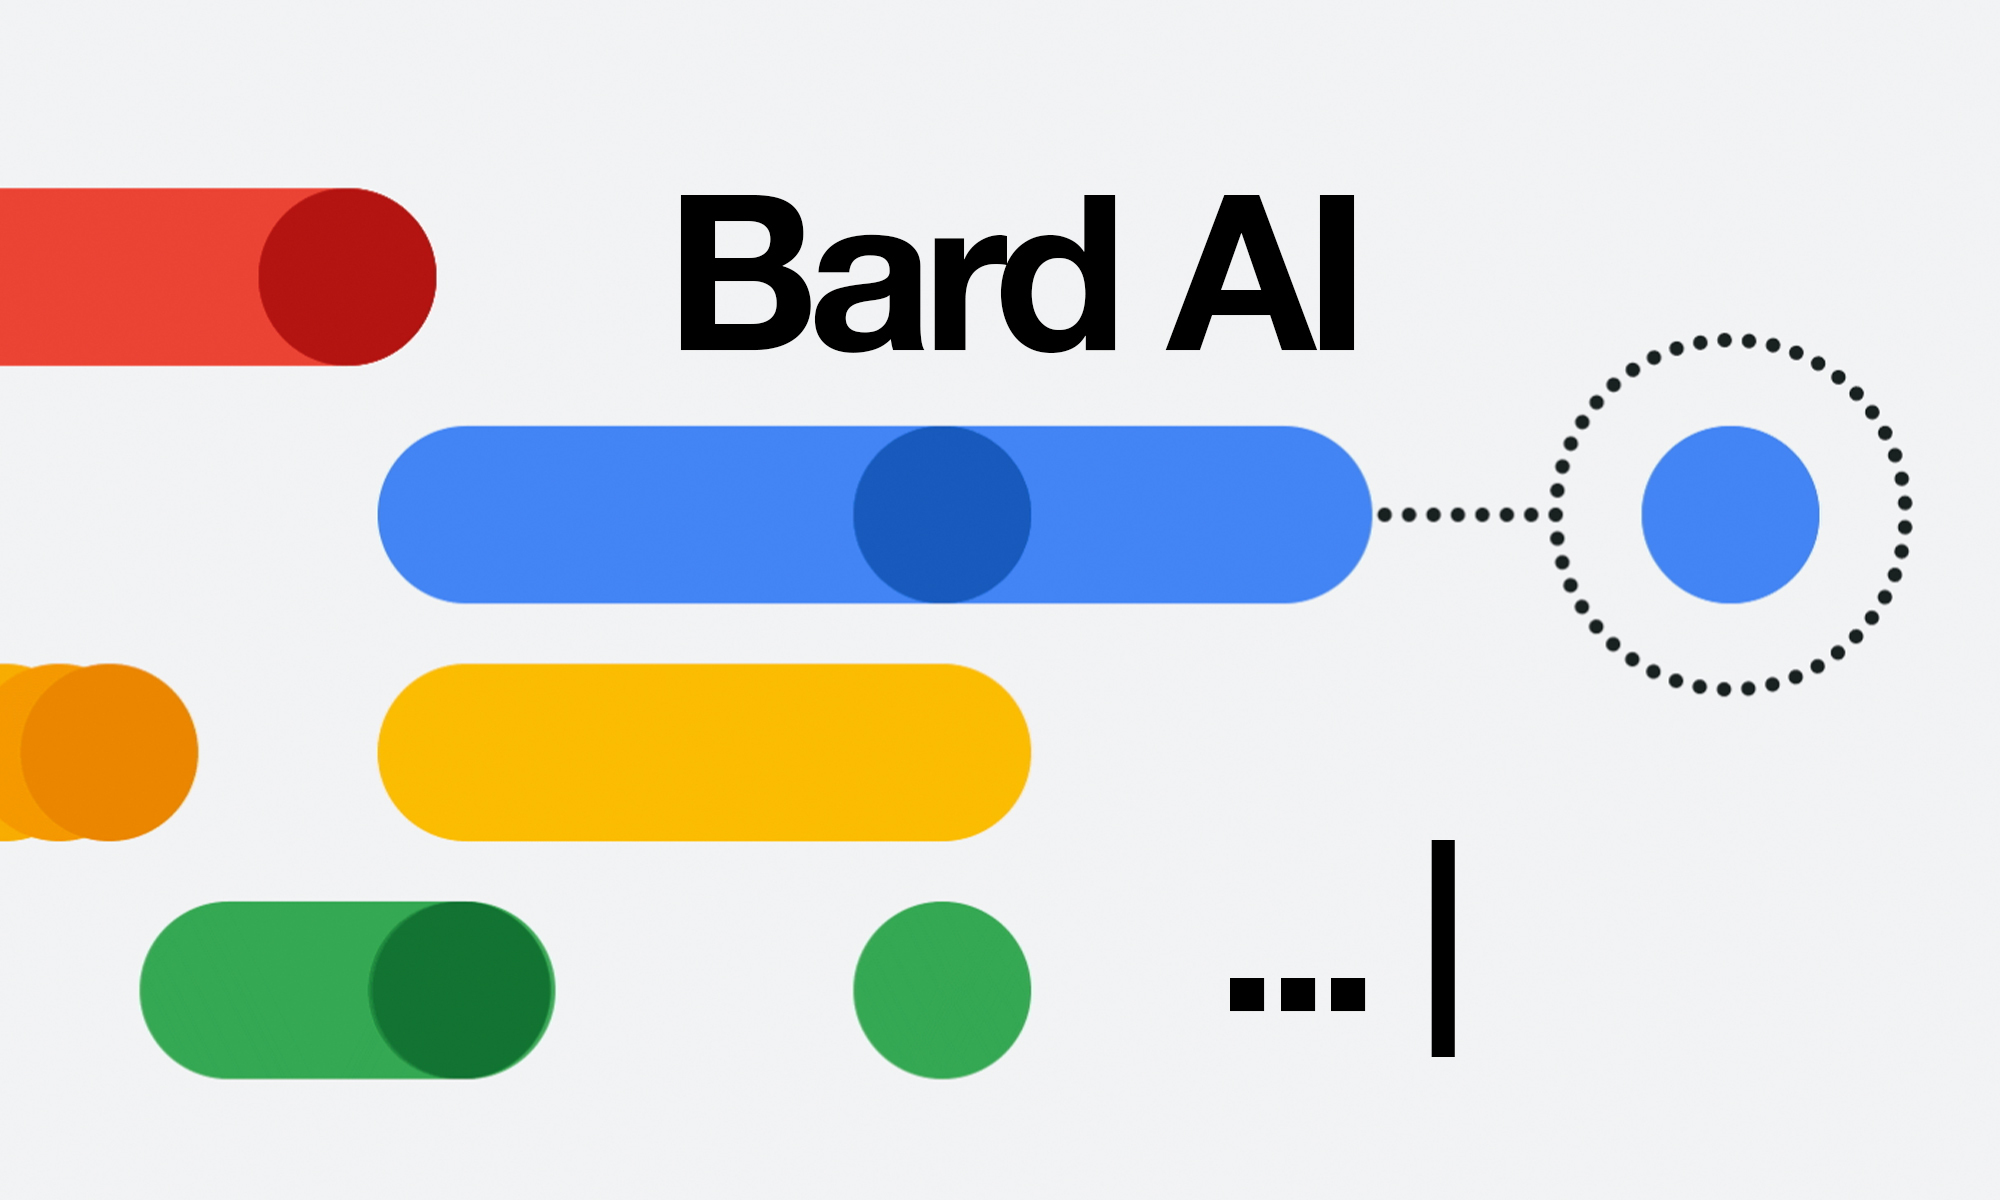 Google Bard is switching to a more 'capable' language model, CEO confirms